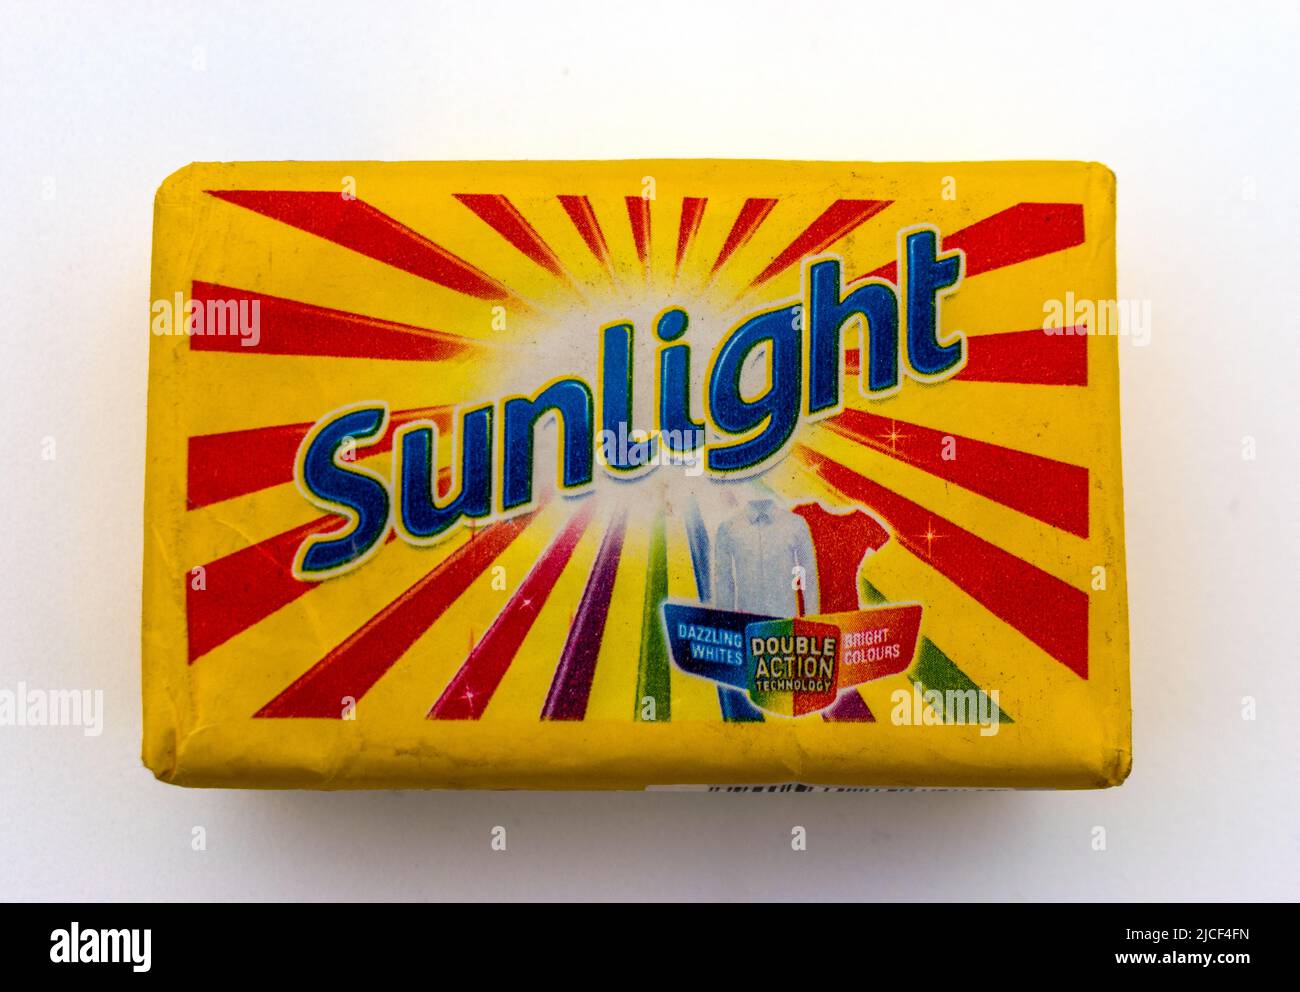 Kolkata, India - June 11, 2022: Top view of famous indian detergent soap brand Sunlight. Stock Photo